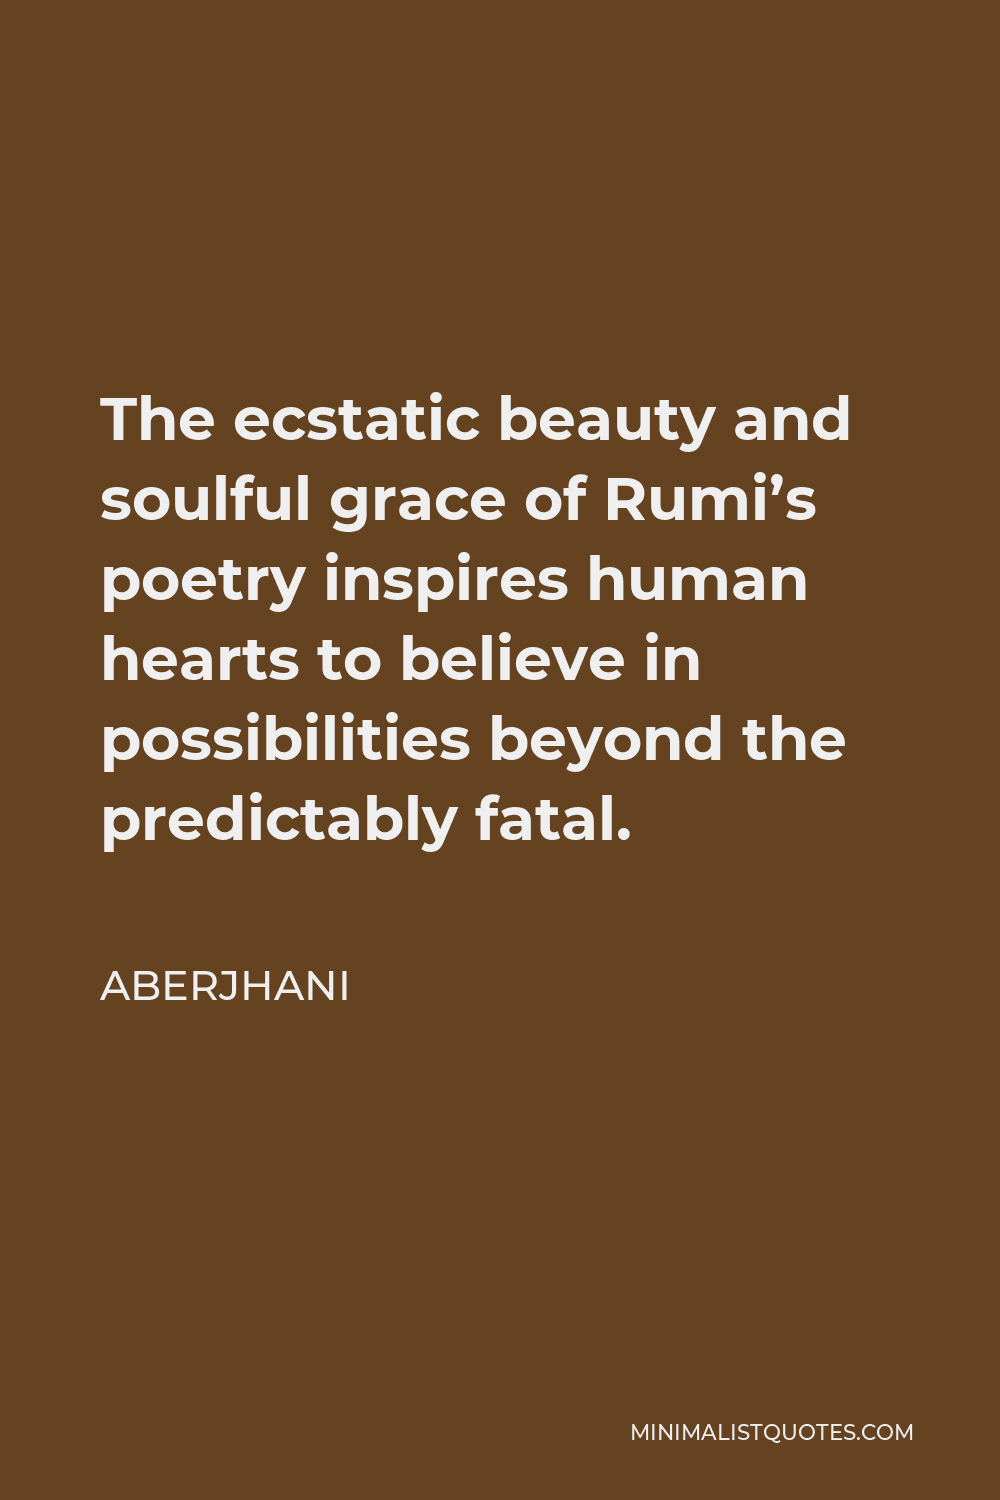 Aberjhani Quote - The ecstatic beauty and soulful grace of Rumi’s poetry inspires human hearts to believe in possibilities beyond the predictably fatal.